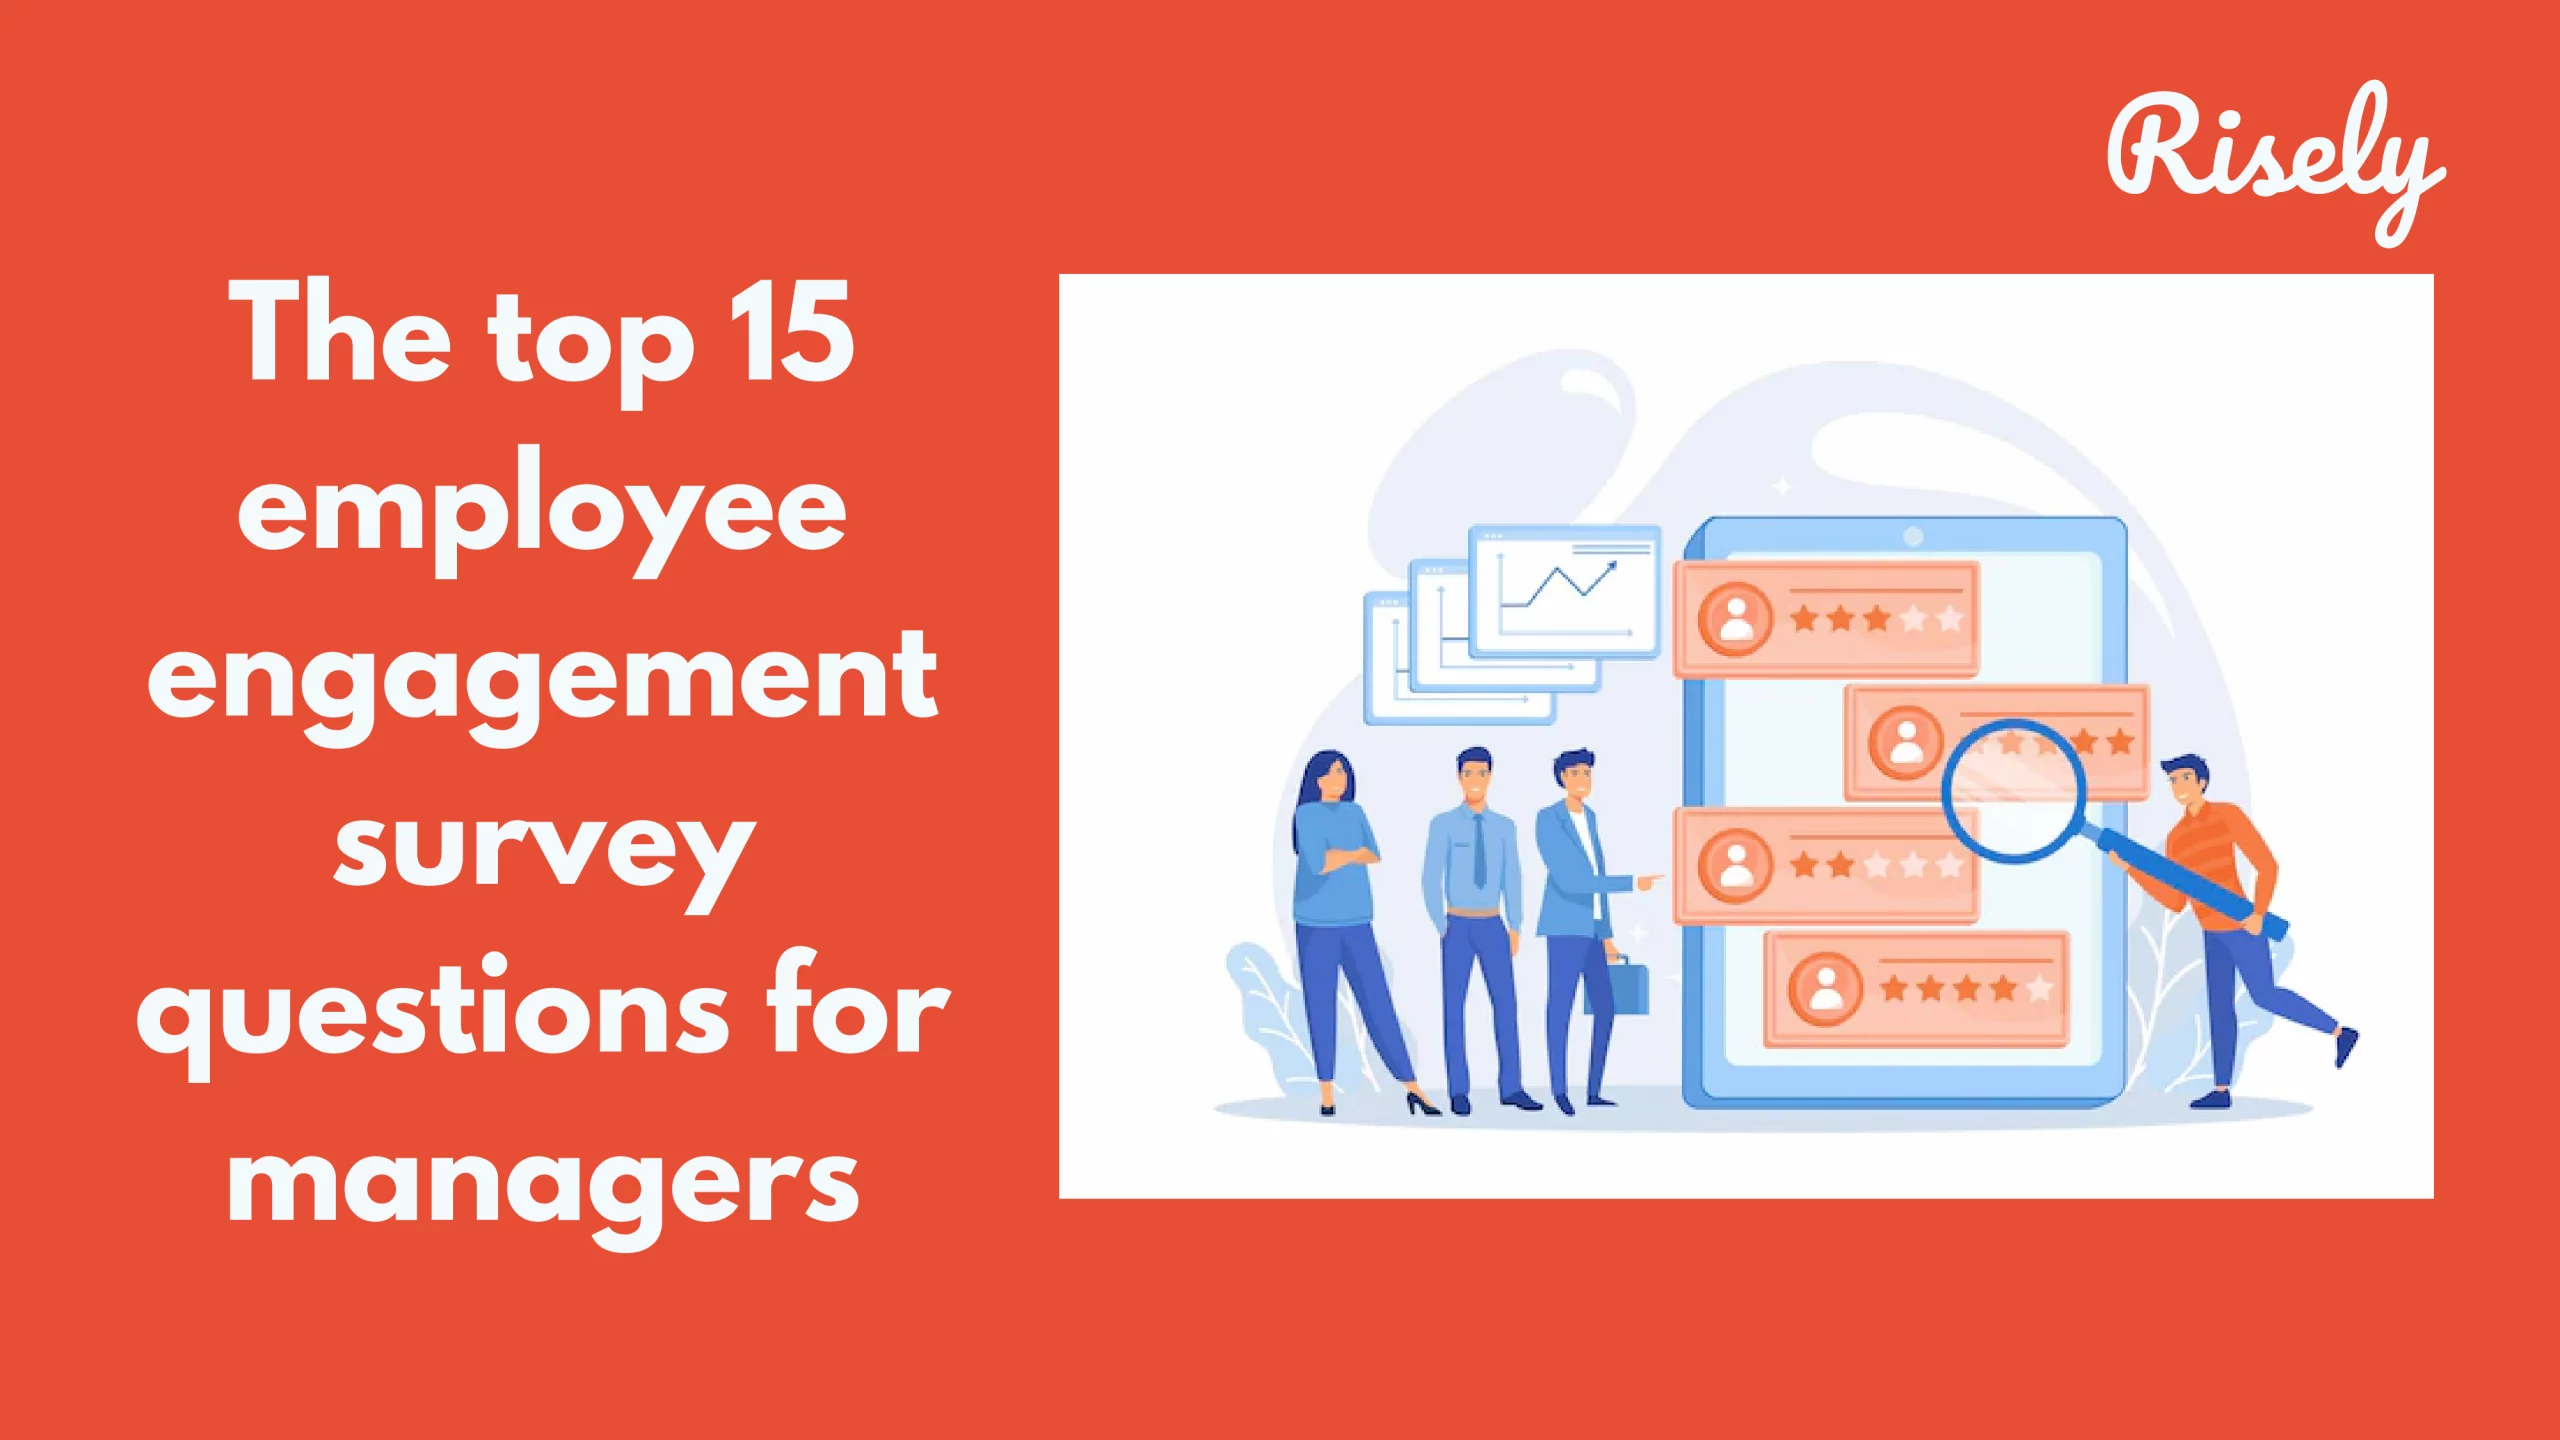 The top 15 employee engagement survey questions for managers